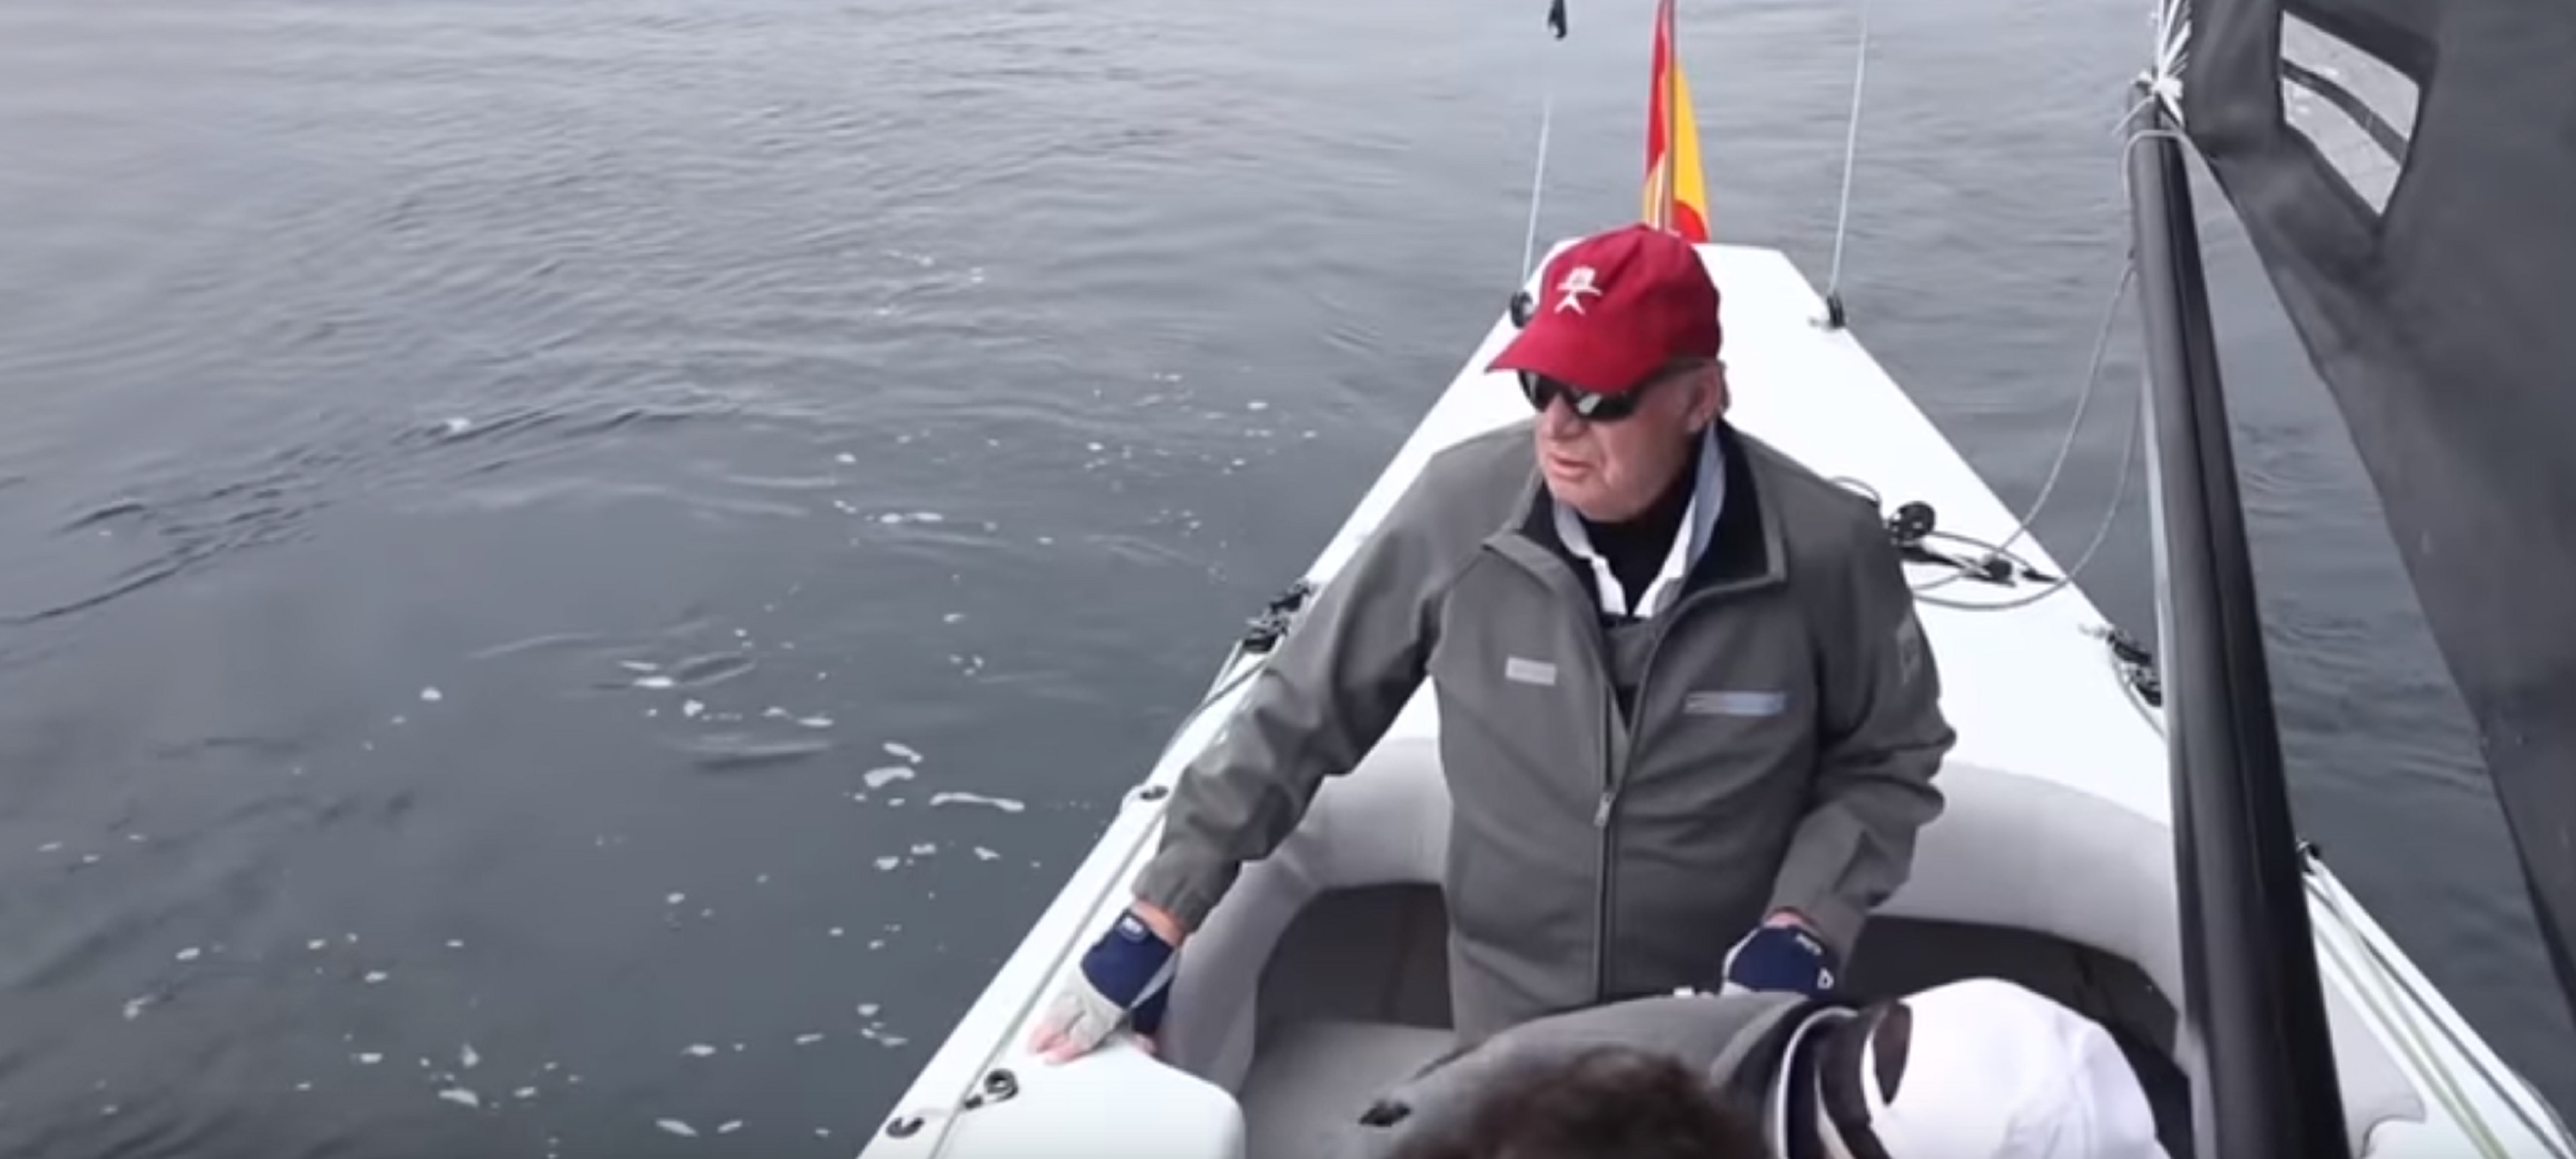 King Juan Carlos I allegedly threw a lover into the sea to avoid being caught